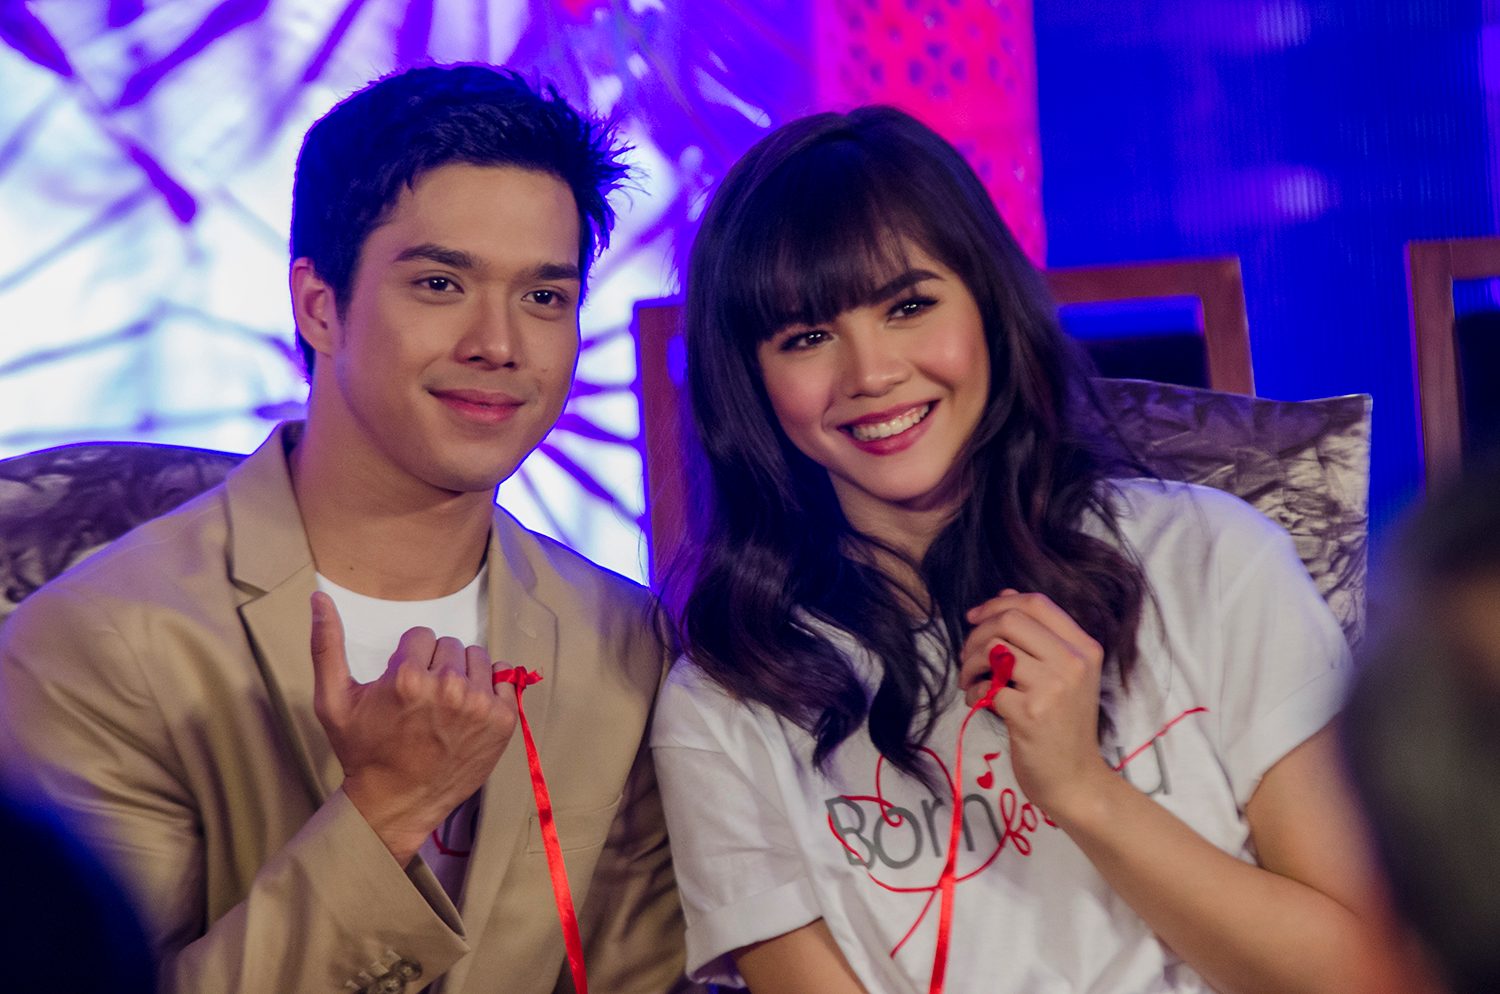 7 fun facts about the ElNella show ‘Born For You’